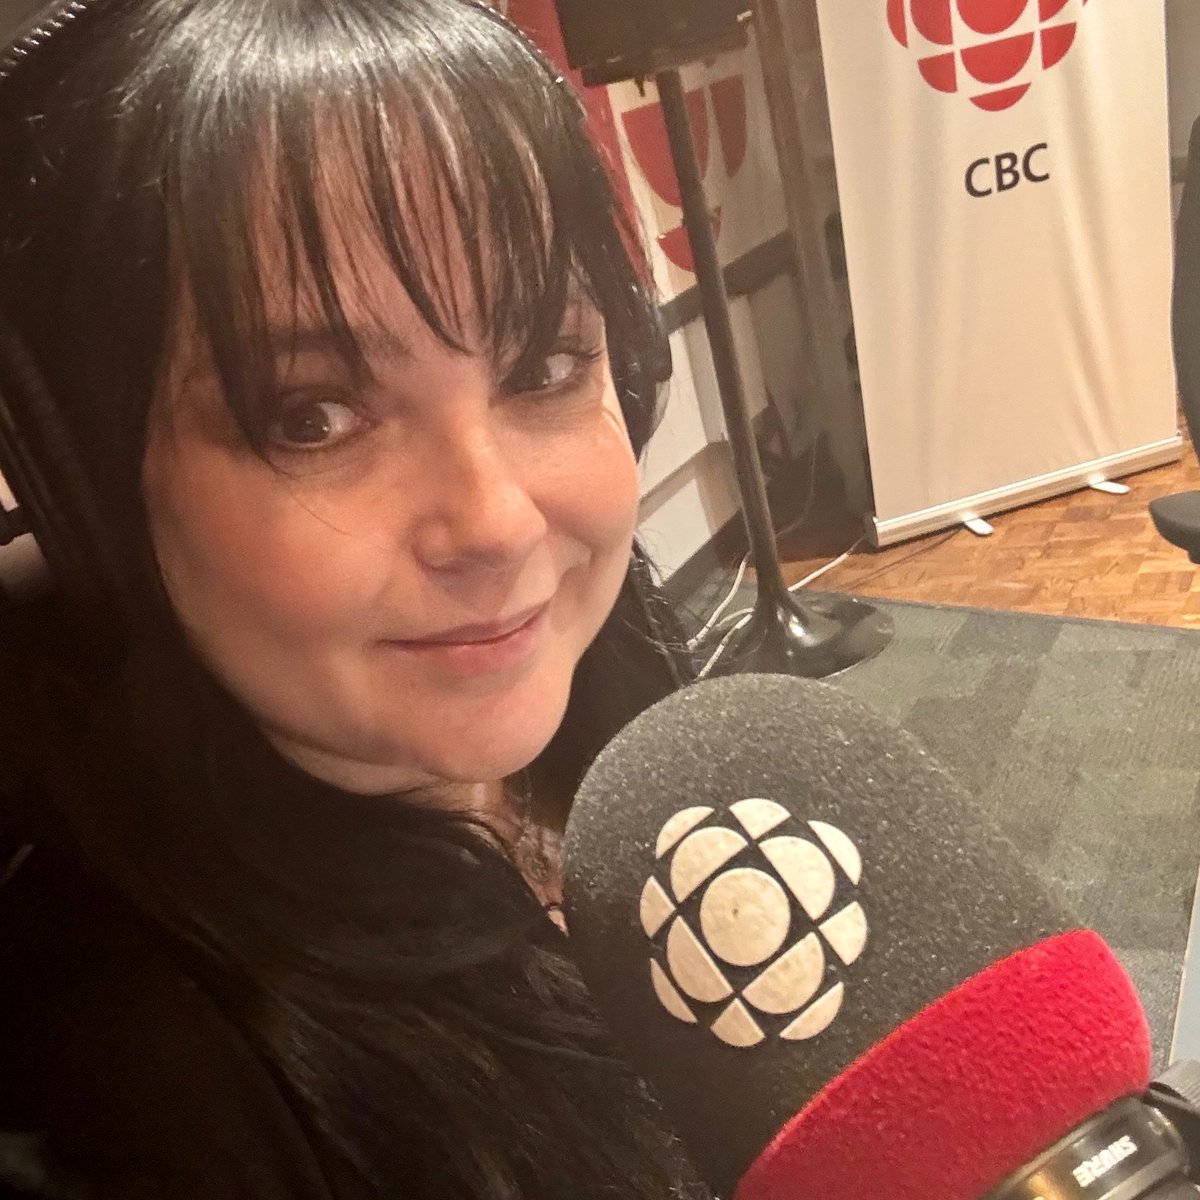 🎙️First in studio experience today joining @mattgallowaycbc to talk about team diversity in the operating room! with input from @SarooSharda_MD 📻🎧Tune in @TheCurrentCBC to listen Thanks for having me @CBC!